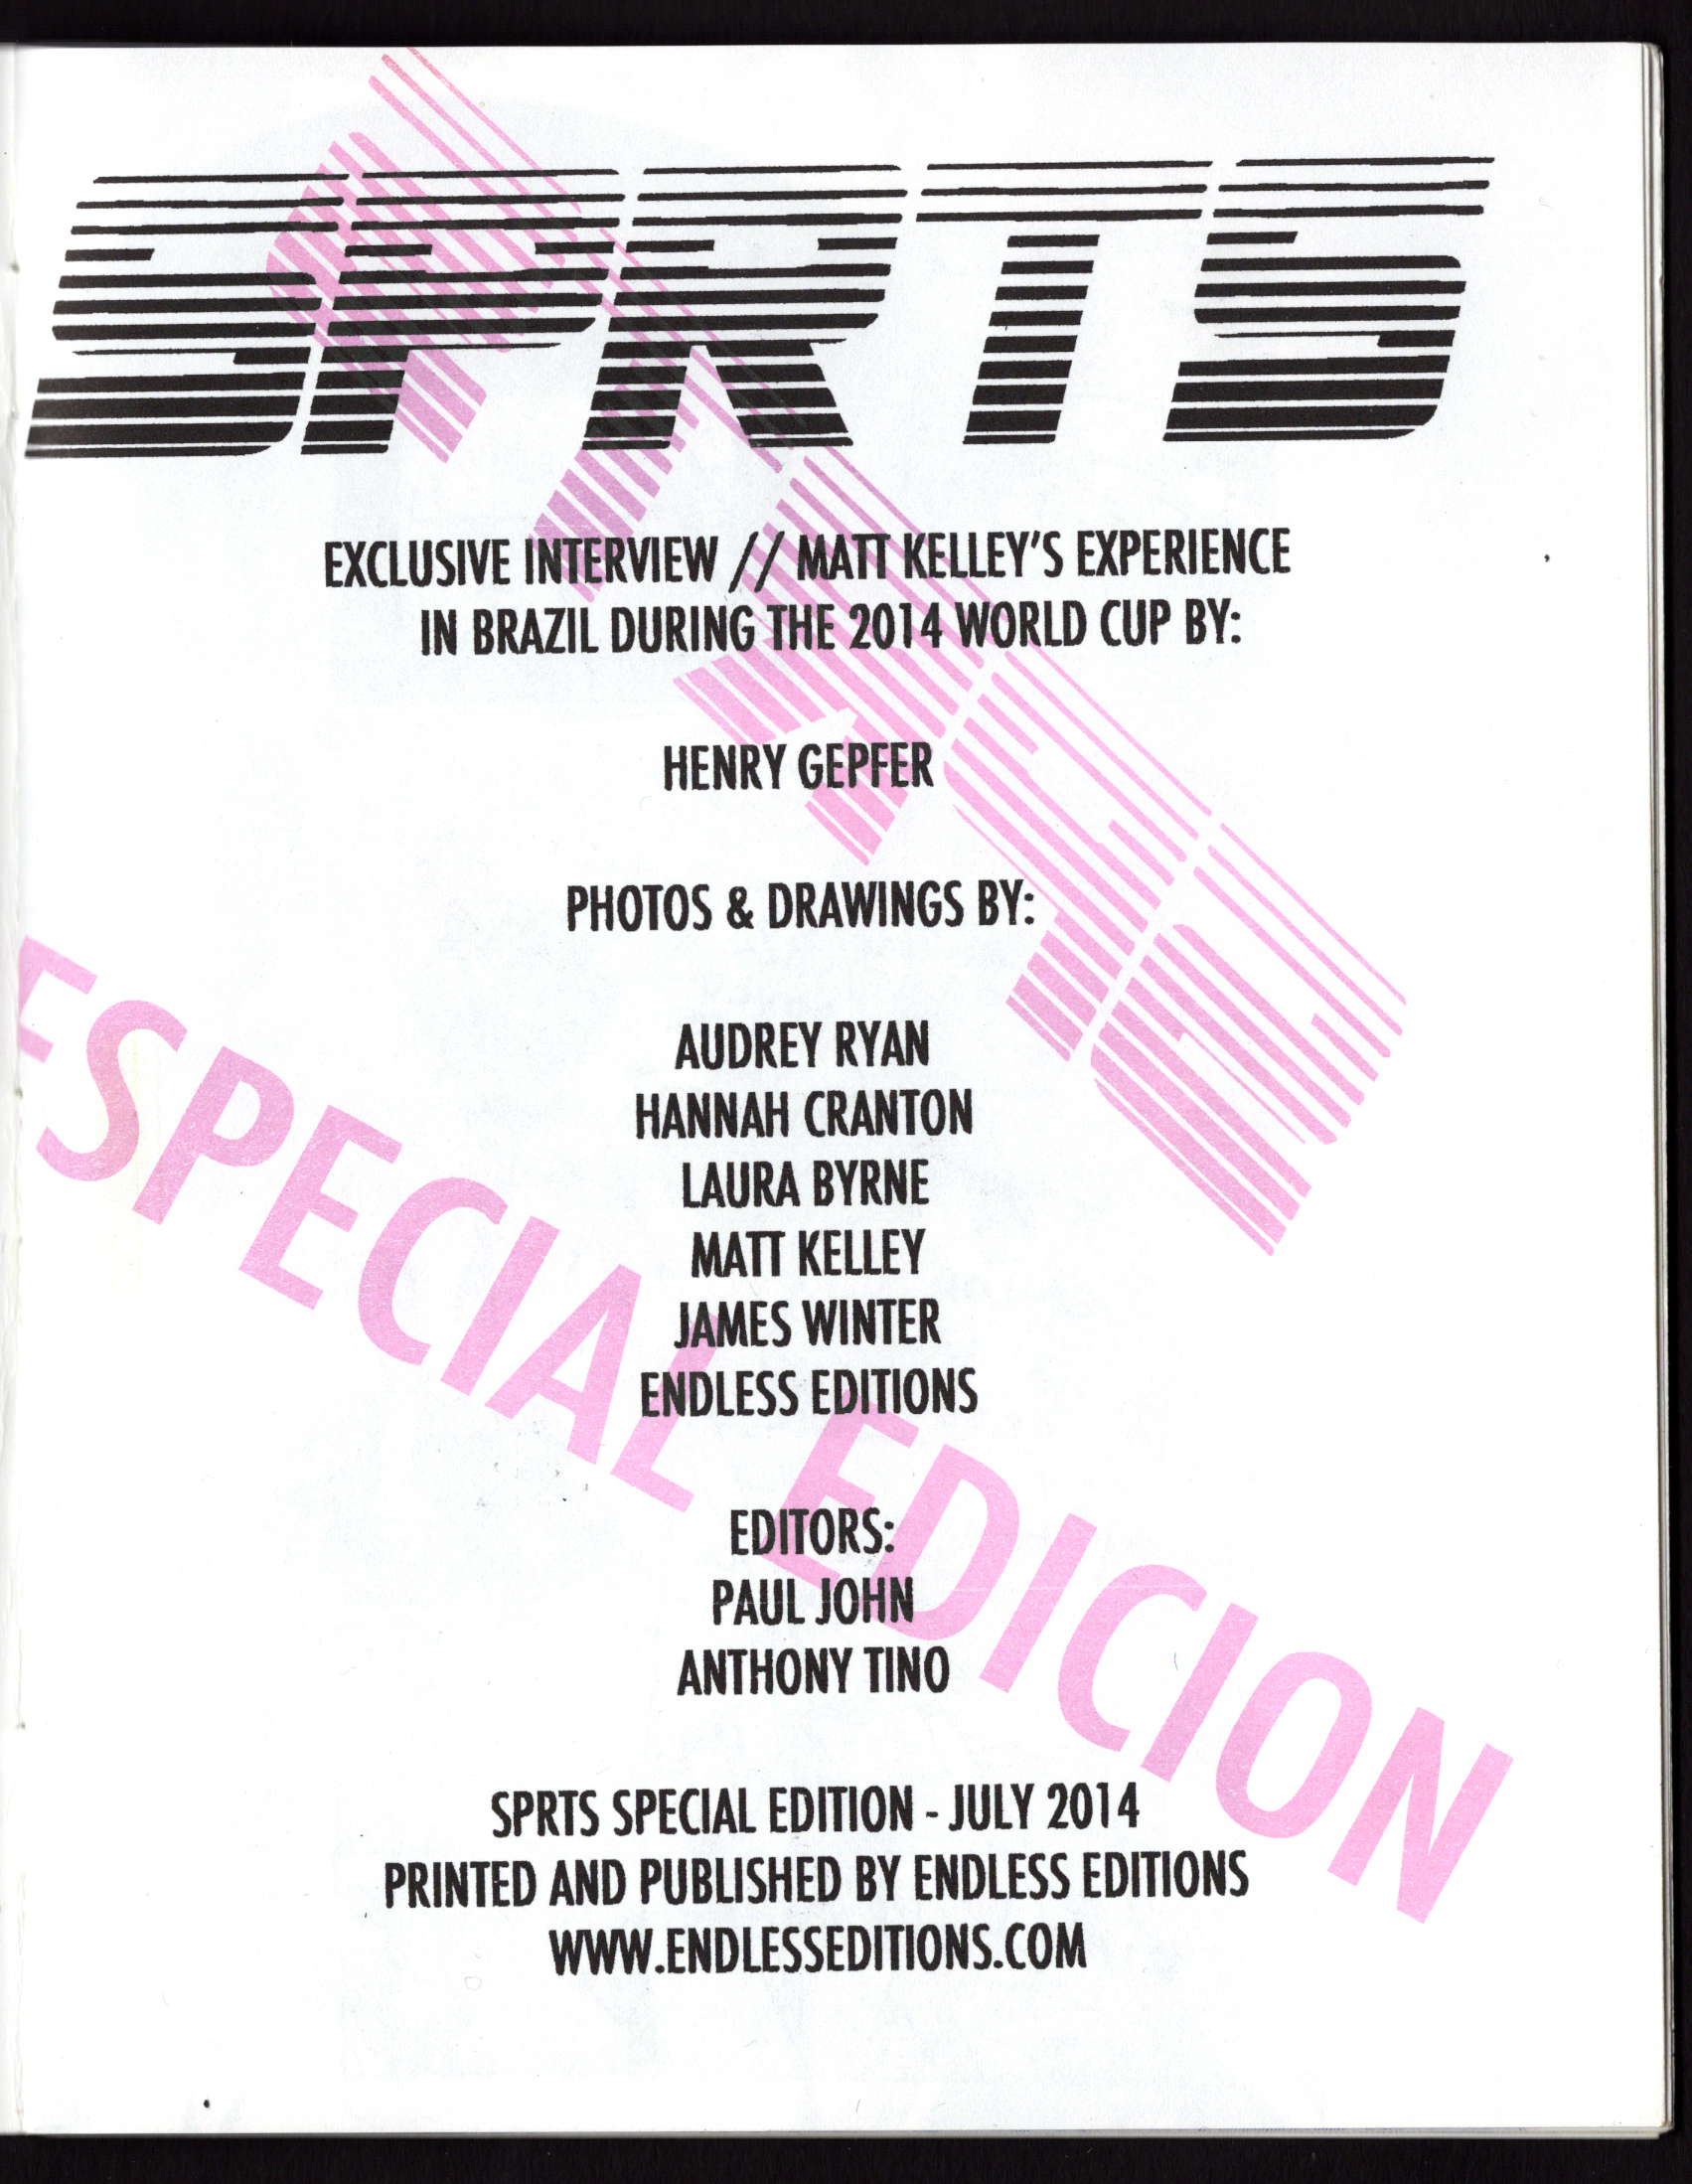 Endless Editions SPRTS SPCL EDN 1